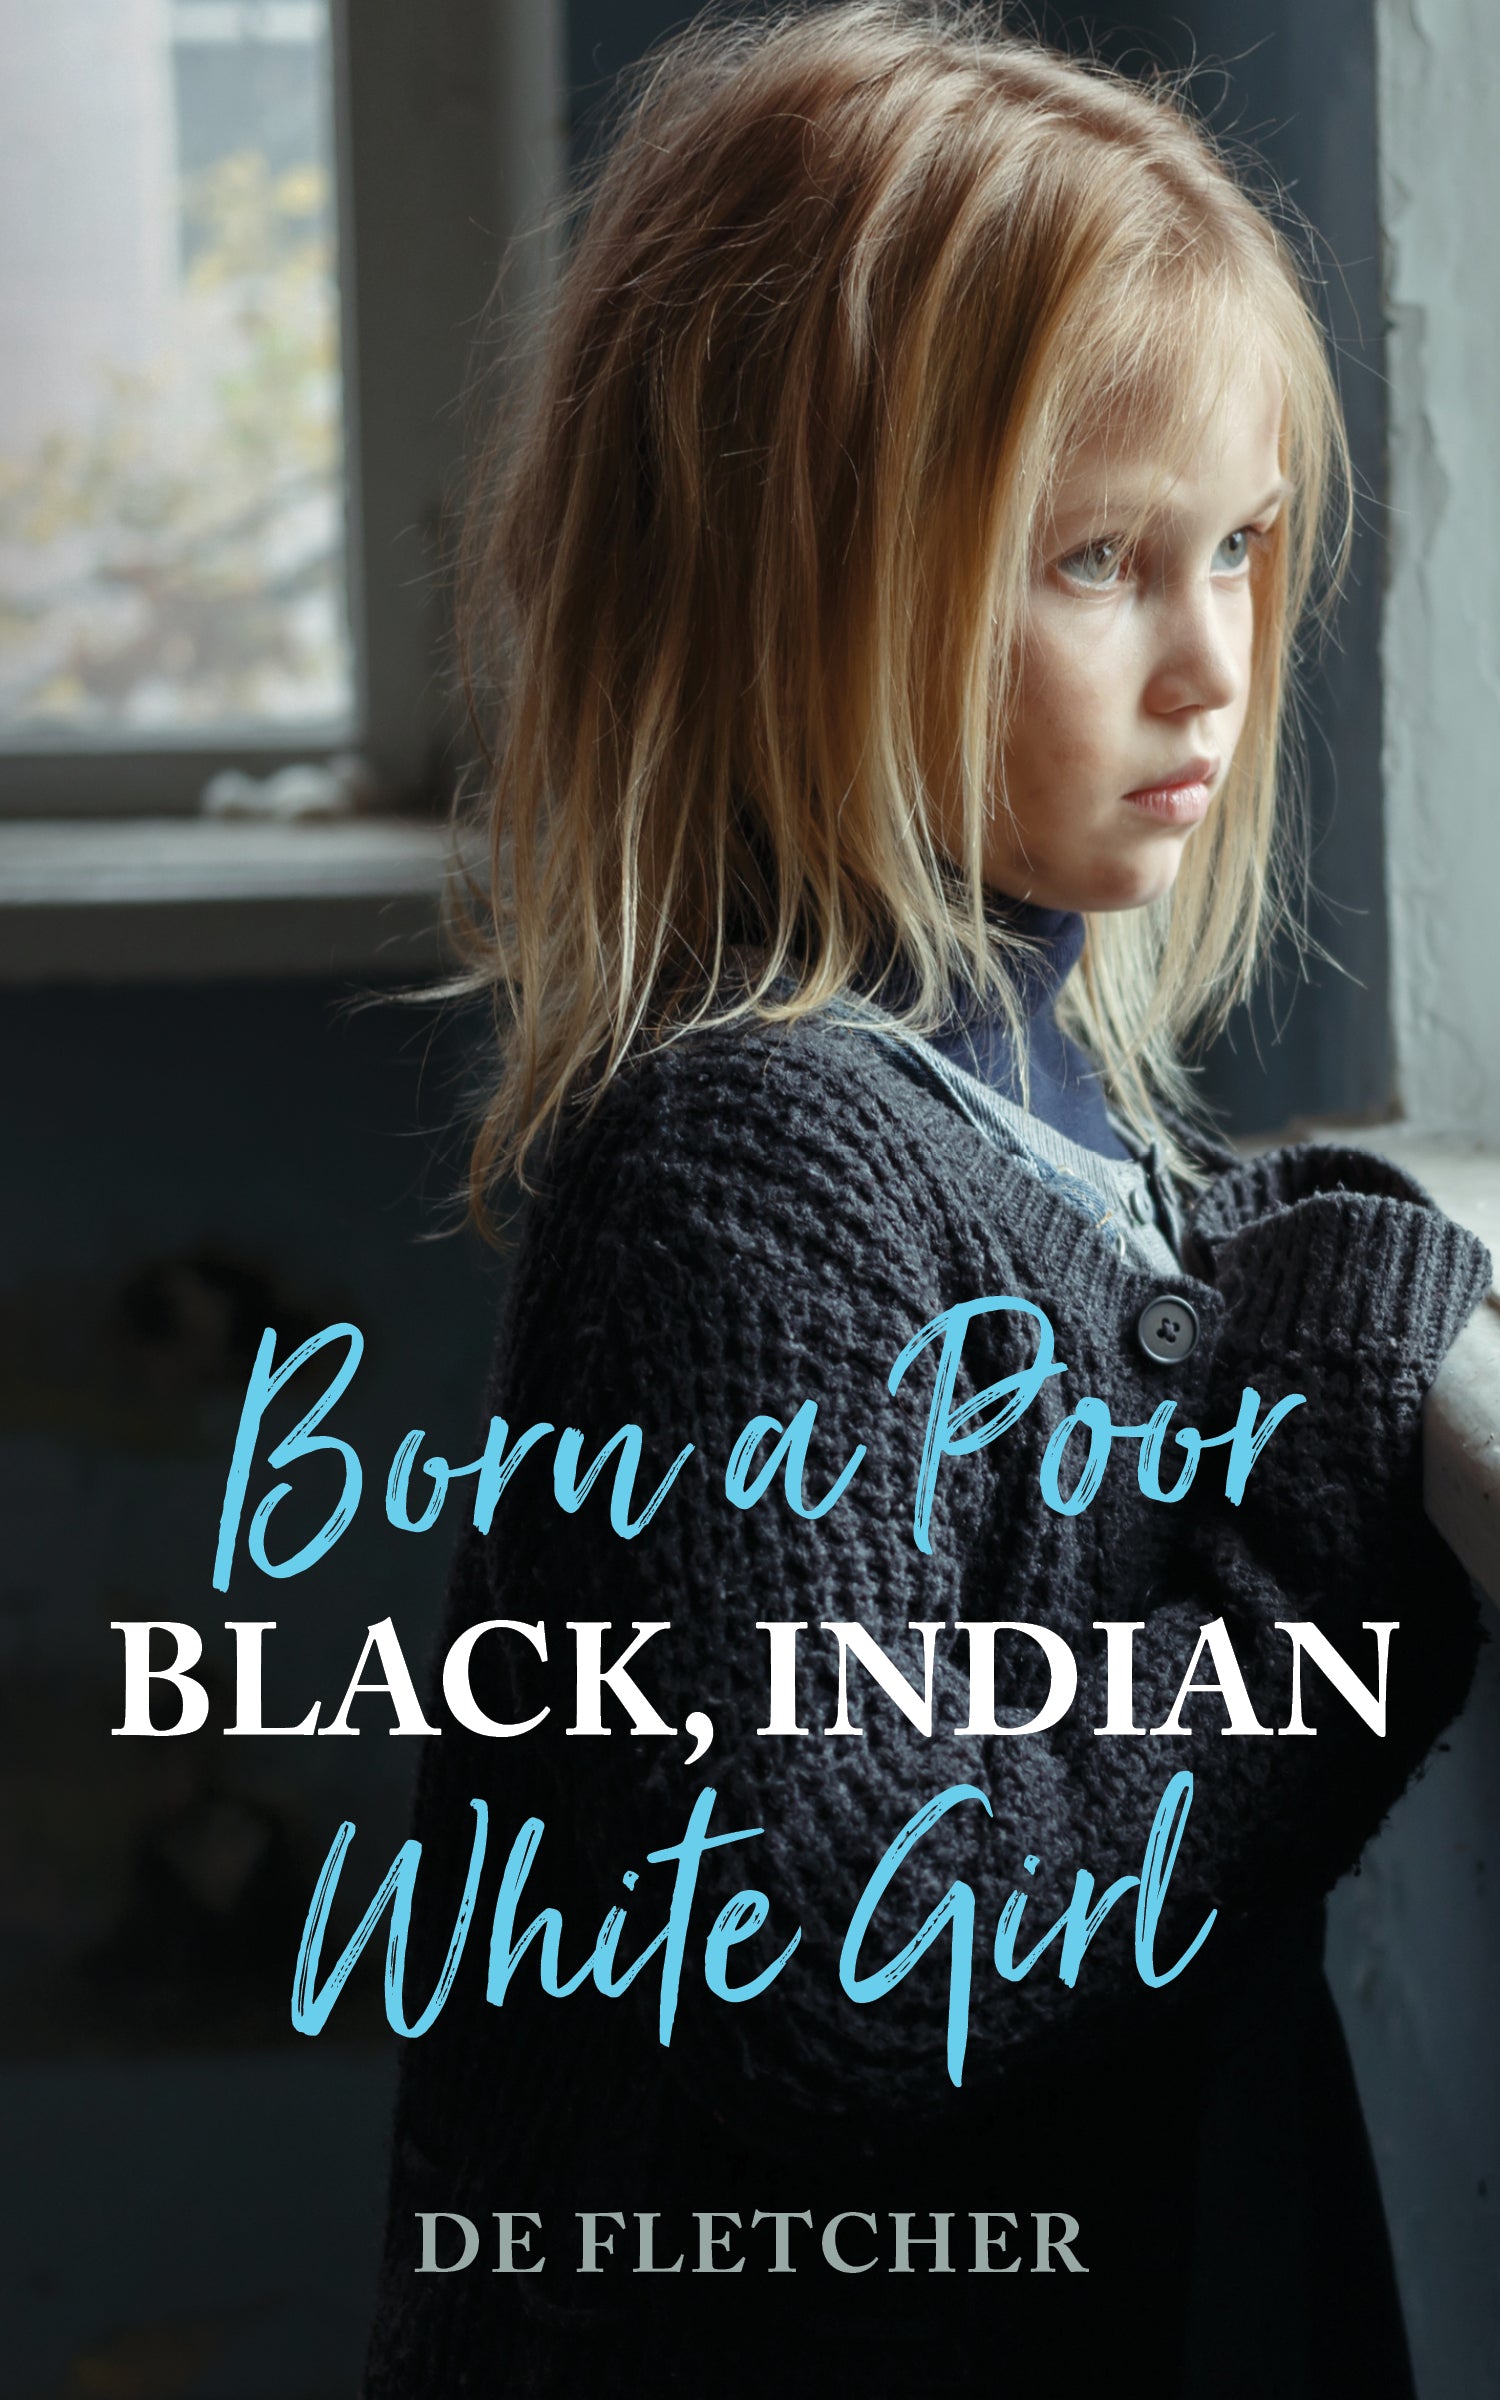 Book cover of poor little girl looking out a window